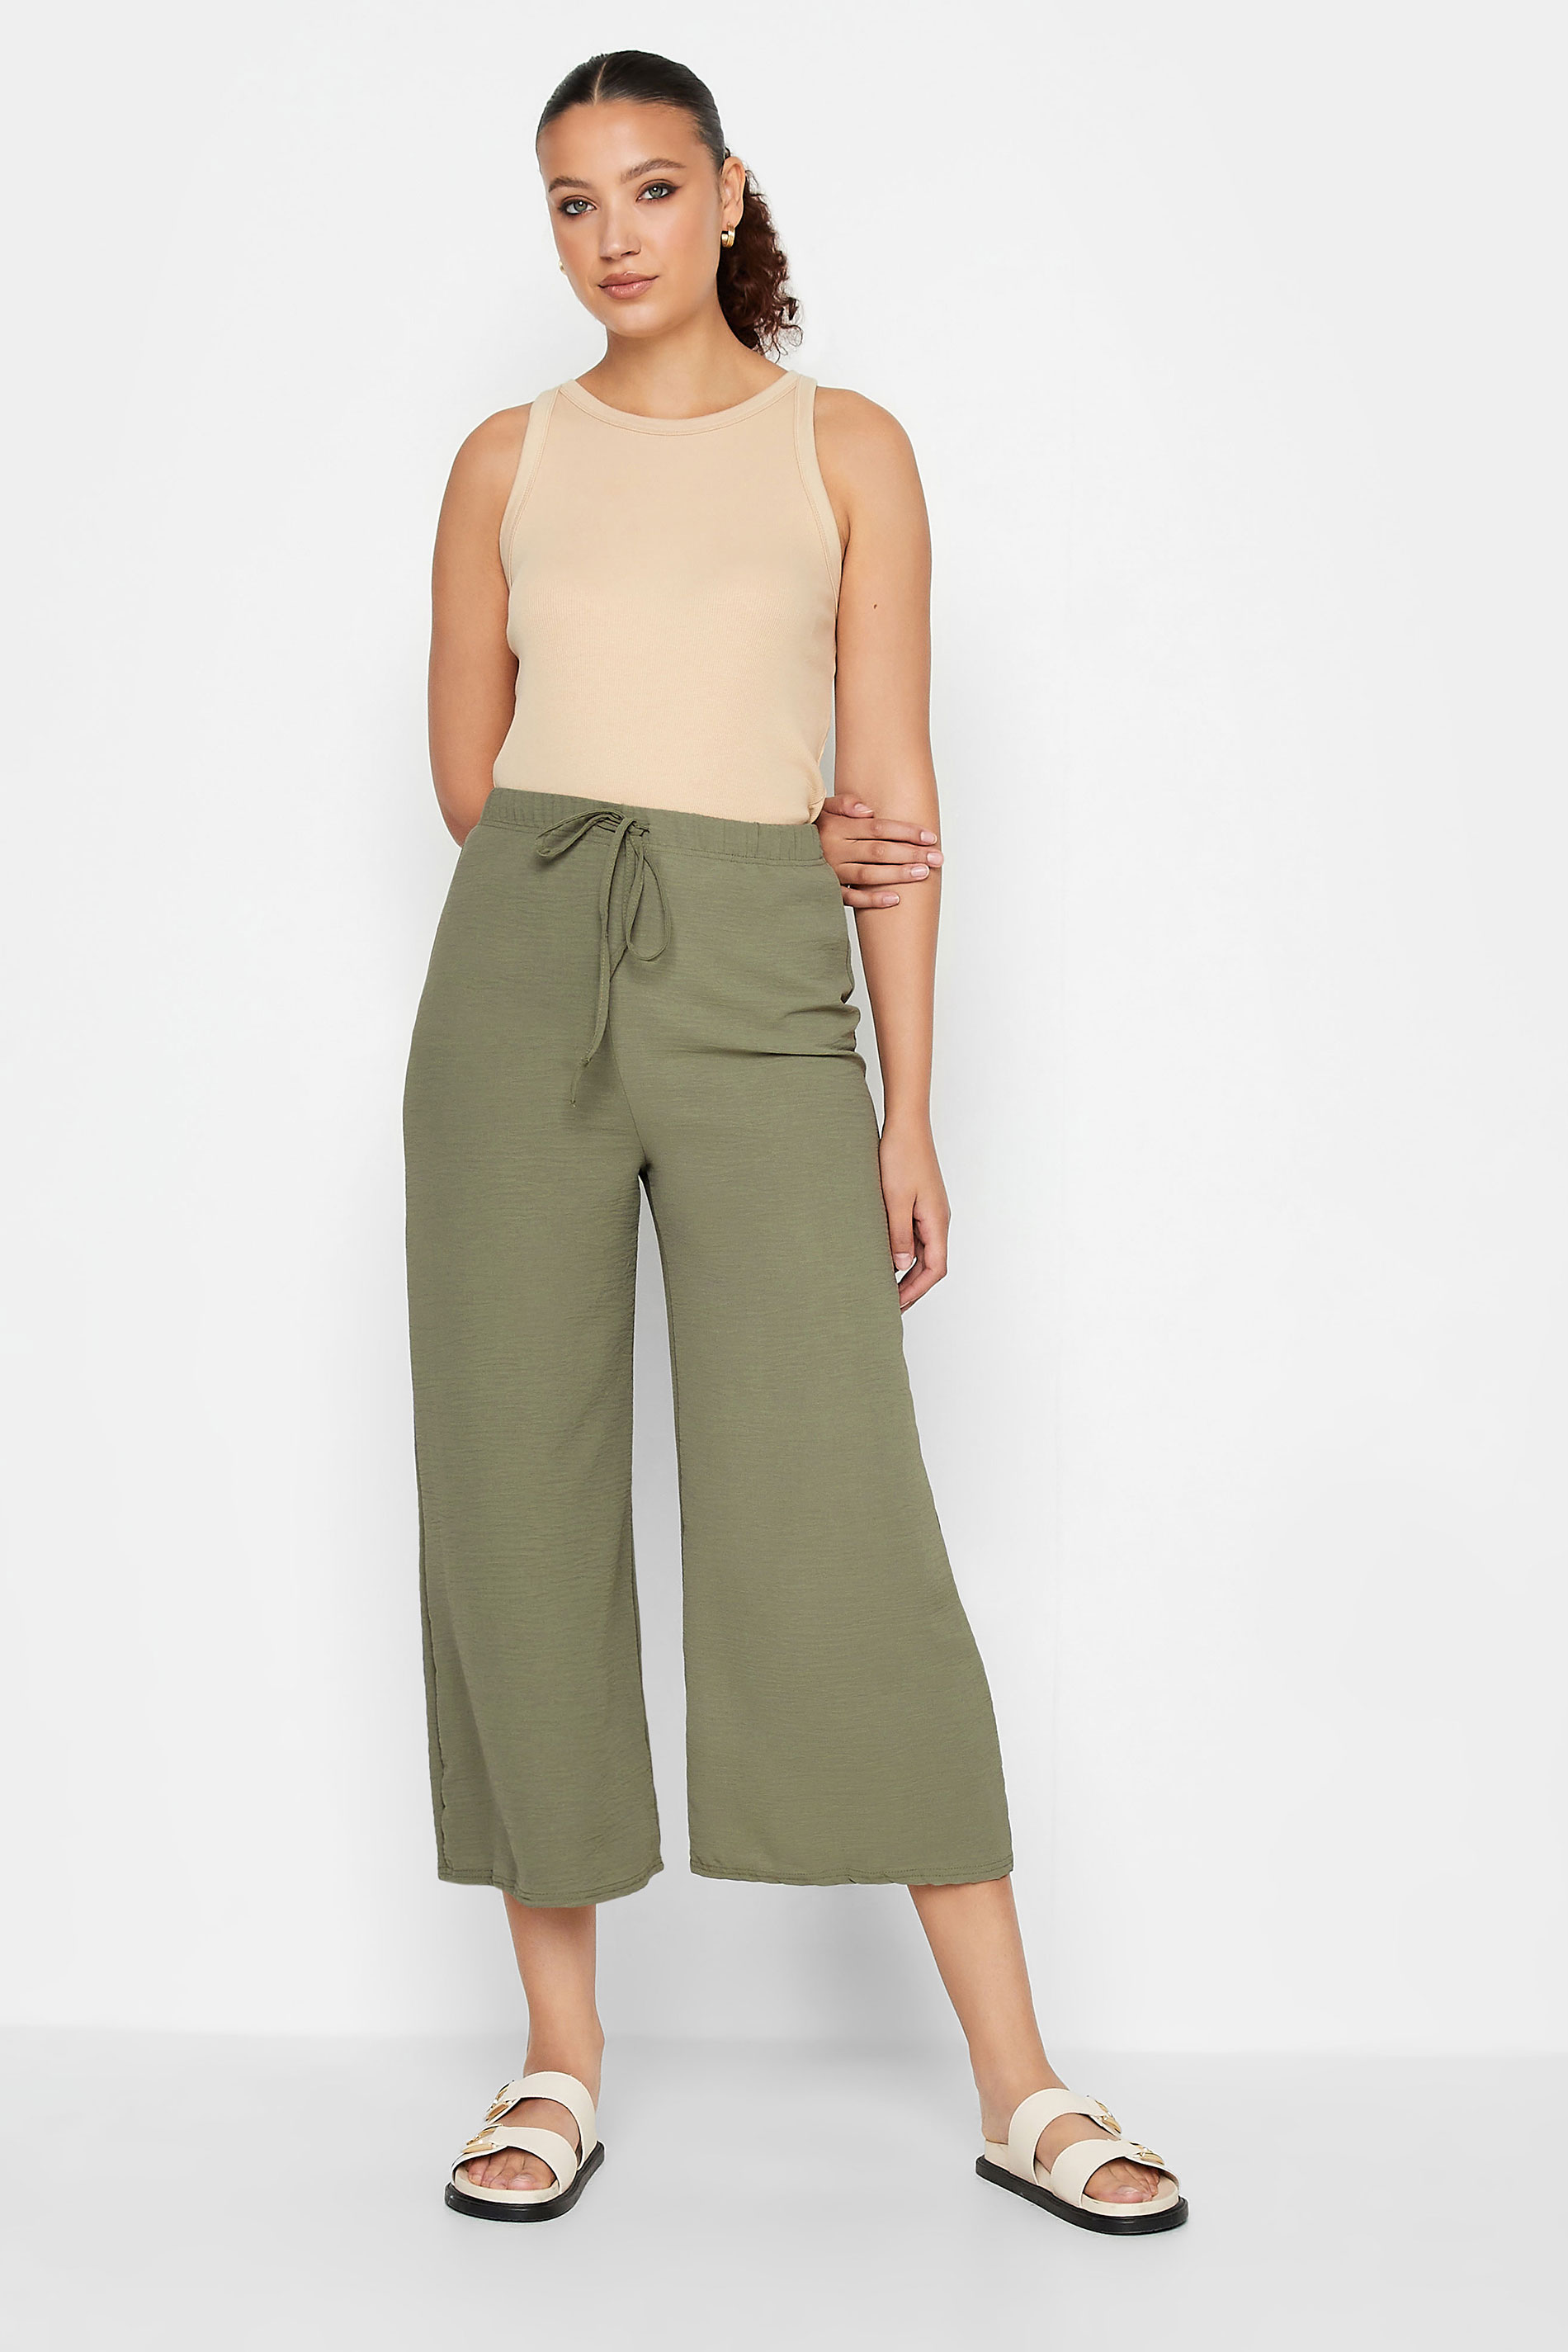 LTS Tall Khaki Green Crepe Wide Leg Cropped Trousers | Long Tall Sally 2